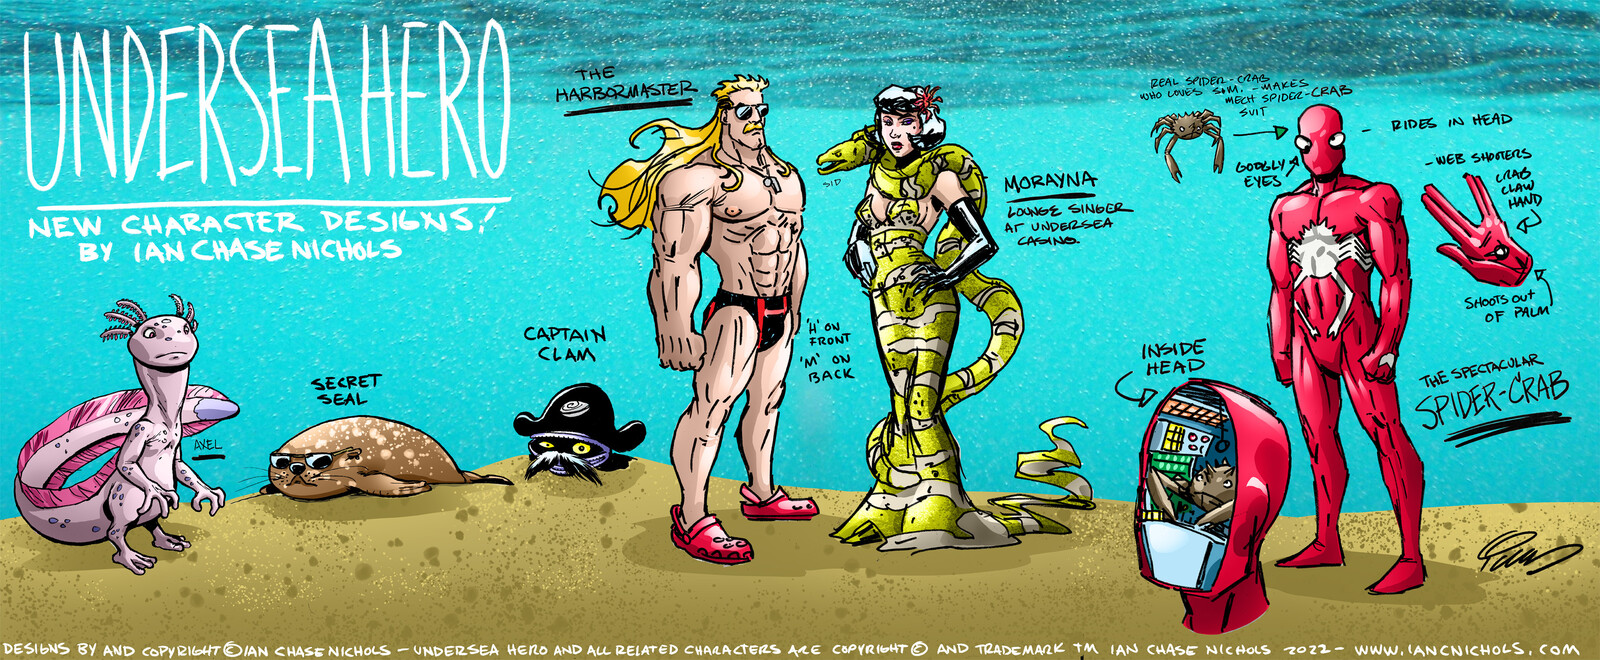 Character designs for my creator-owned comic, UNDERSEA HERO. UH is a blending of my love of marine biology and comics. There are characters that are sea creatures, exaggerated or enhanced creatures, and sea-themed people. 
© Ian Chase Nichols